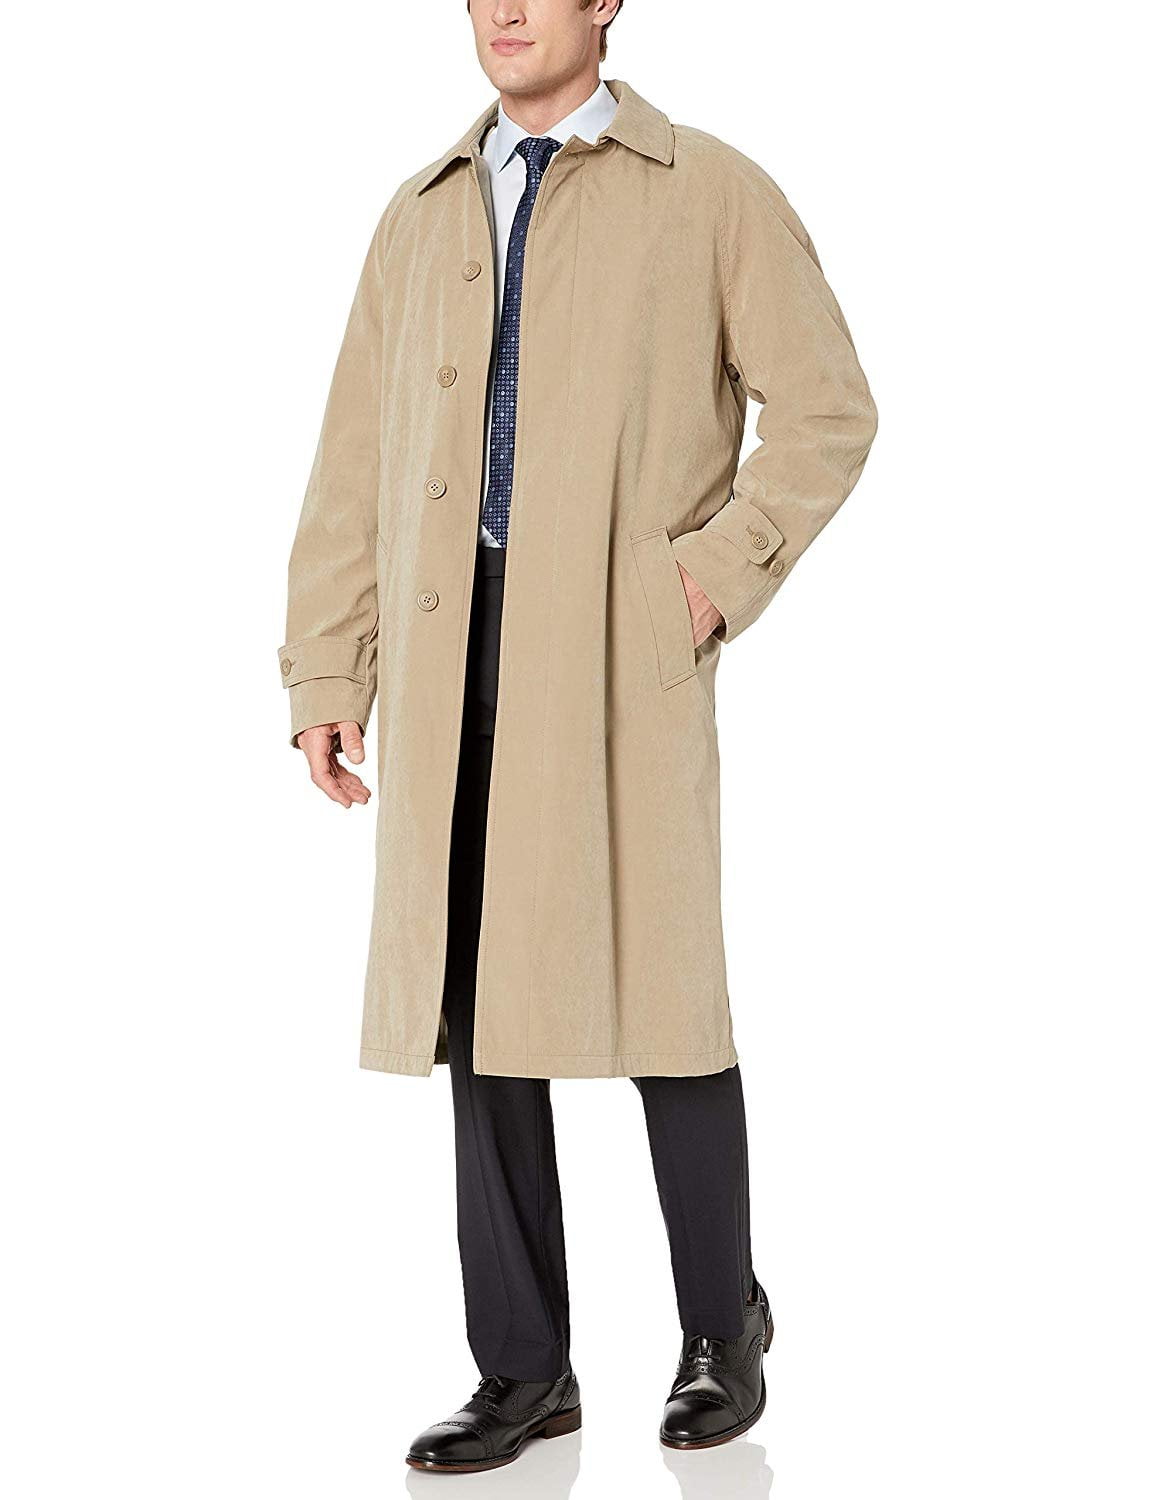 Natural for Men Mens Clothing Coats Long coats and winter coats Rains Waterproof Poncho in Beige 